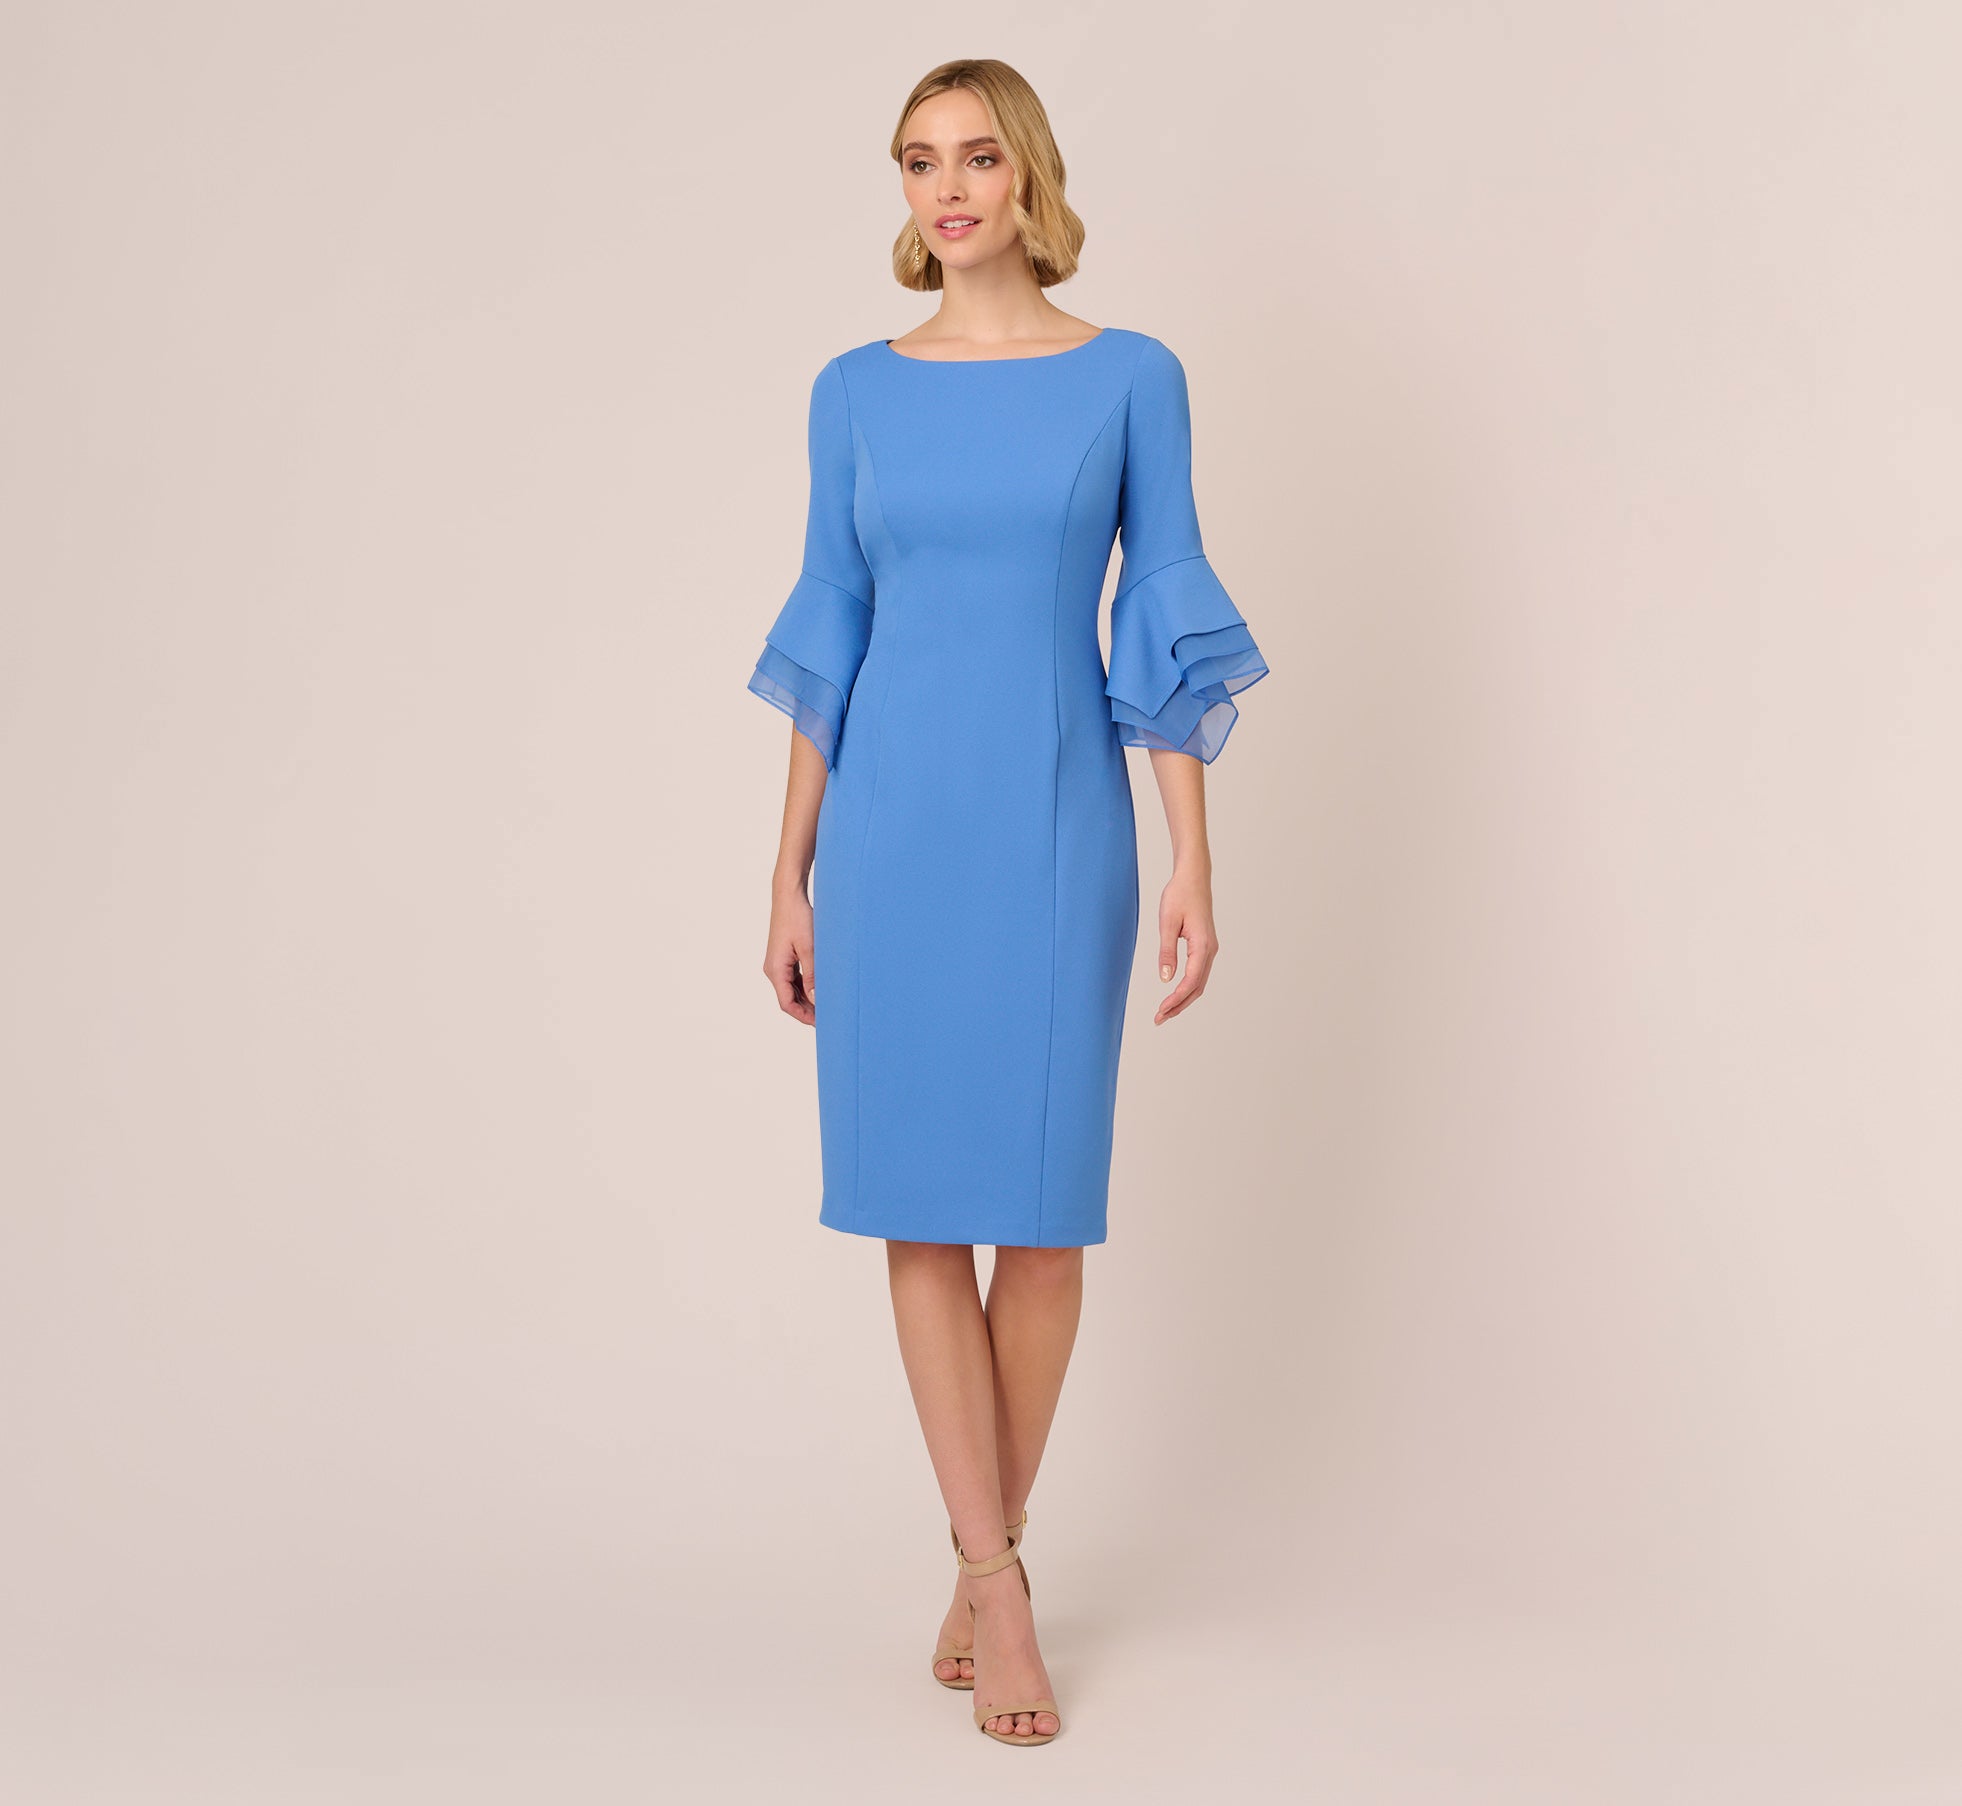 Knit Crepe Sheath Dress With Tiered Three Quarter Sleeves In Cool ...